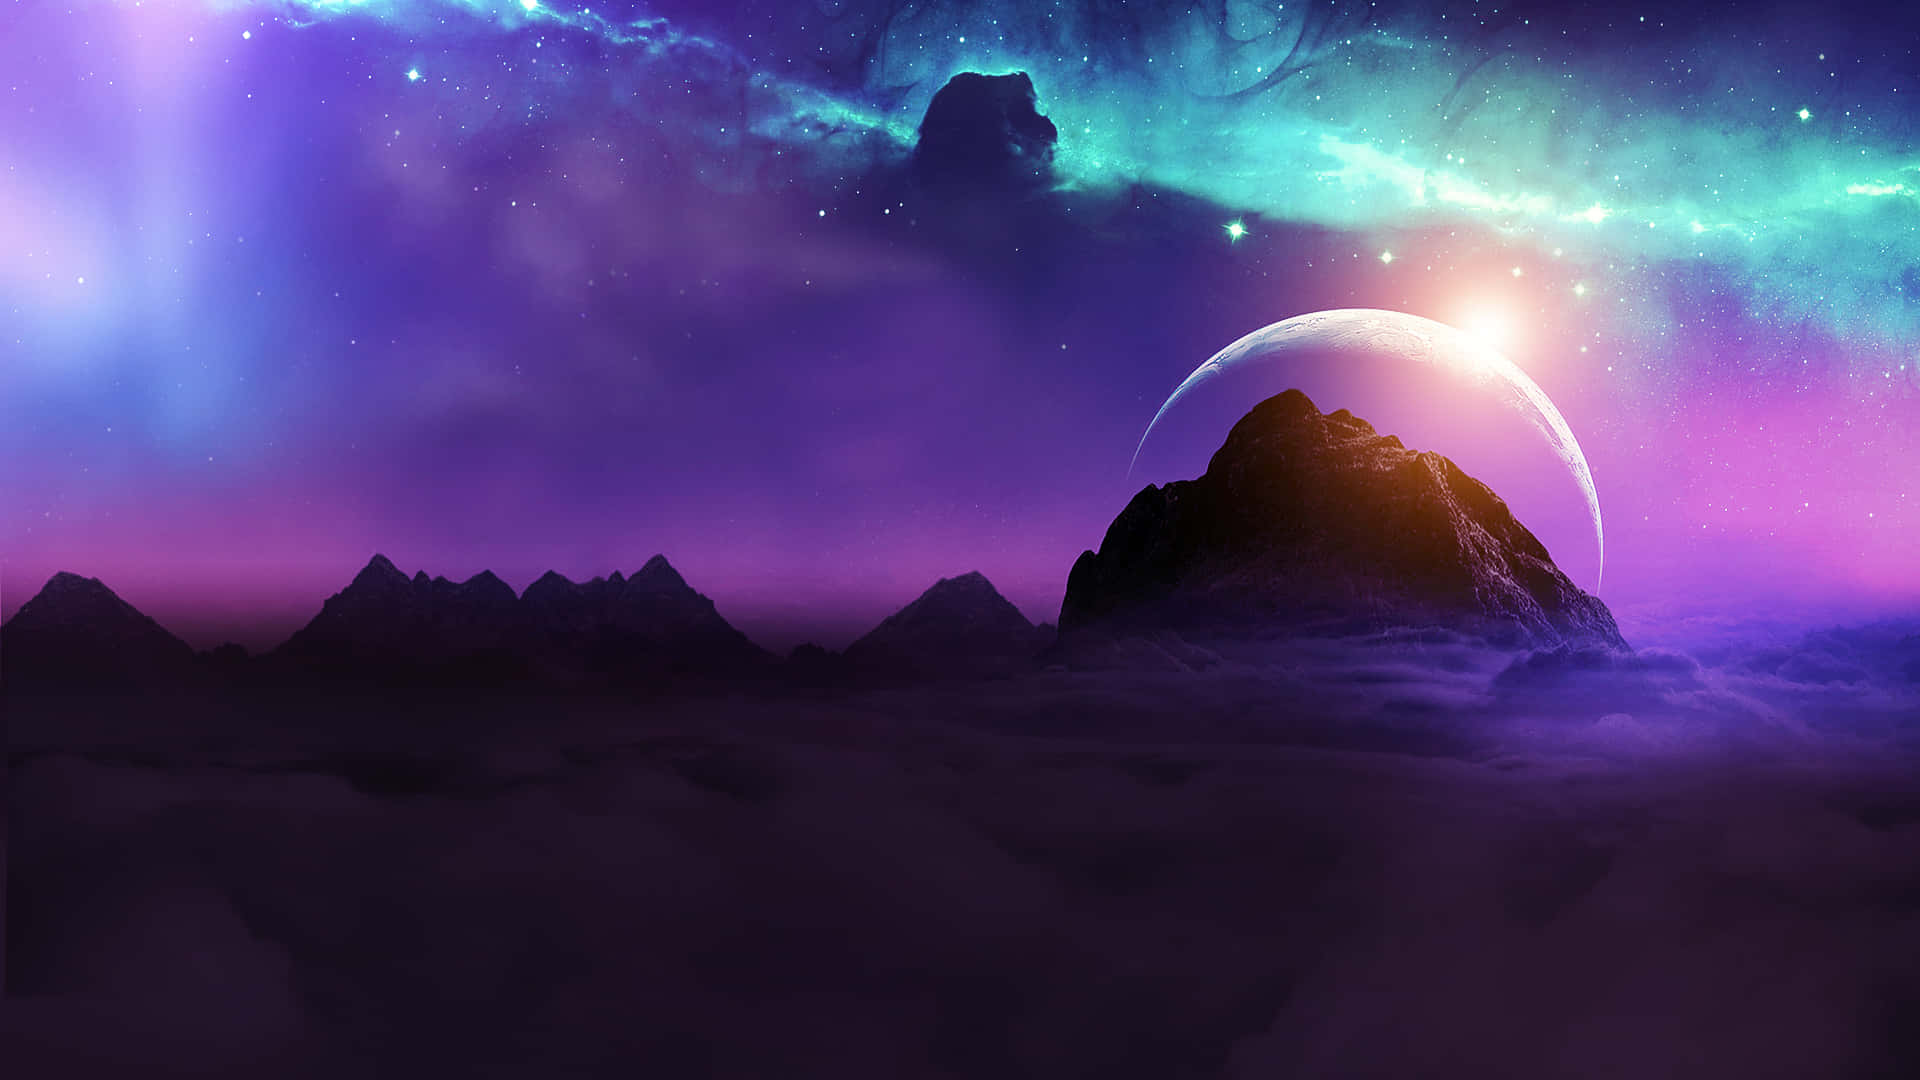 Witness The Splendor Of Outer Space In Incredible 8K Wallpaper